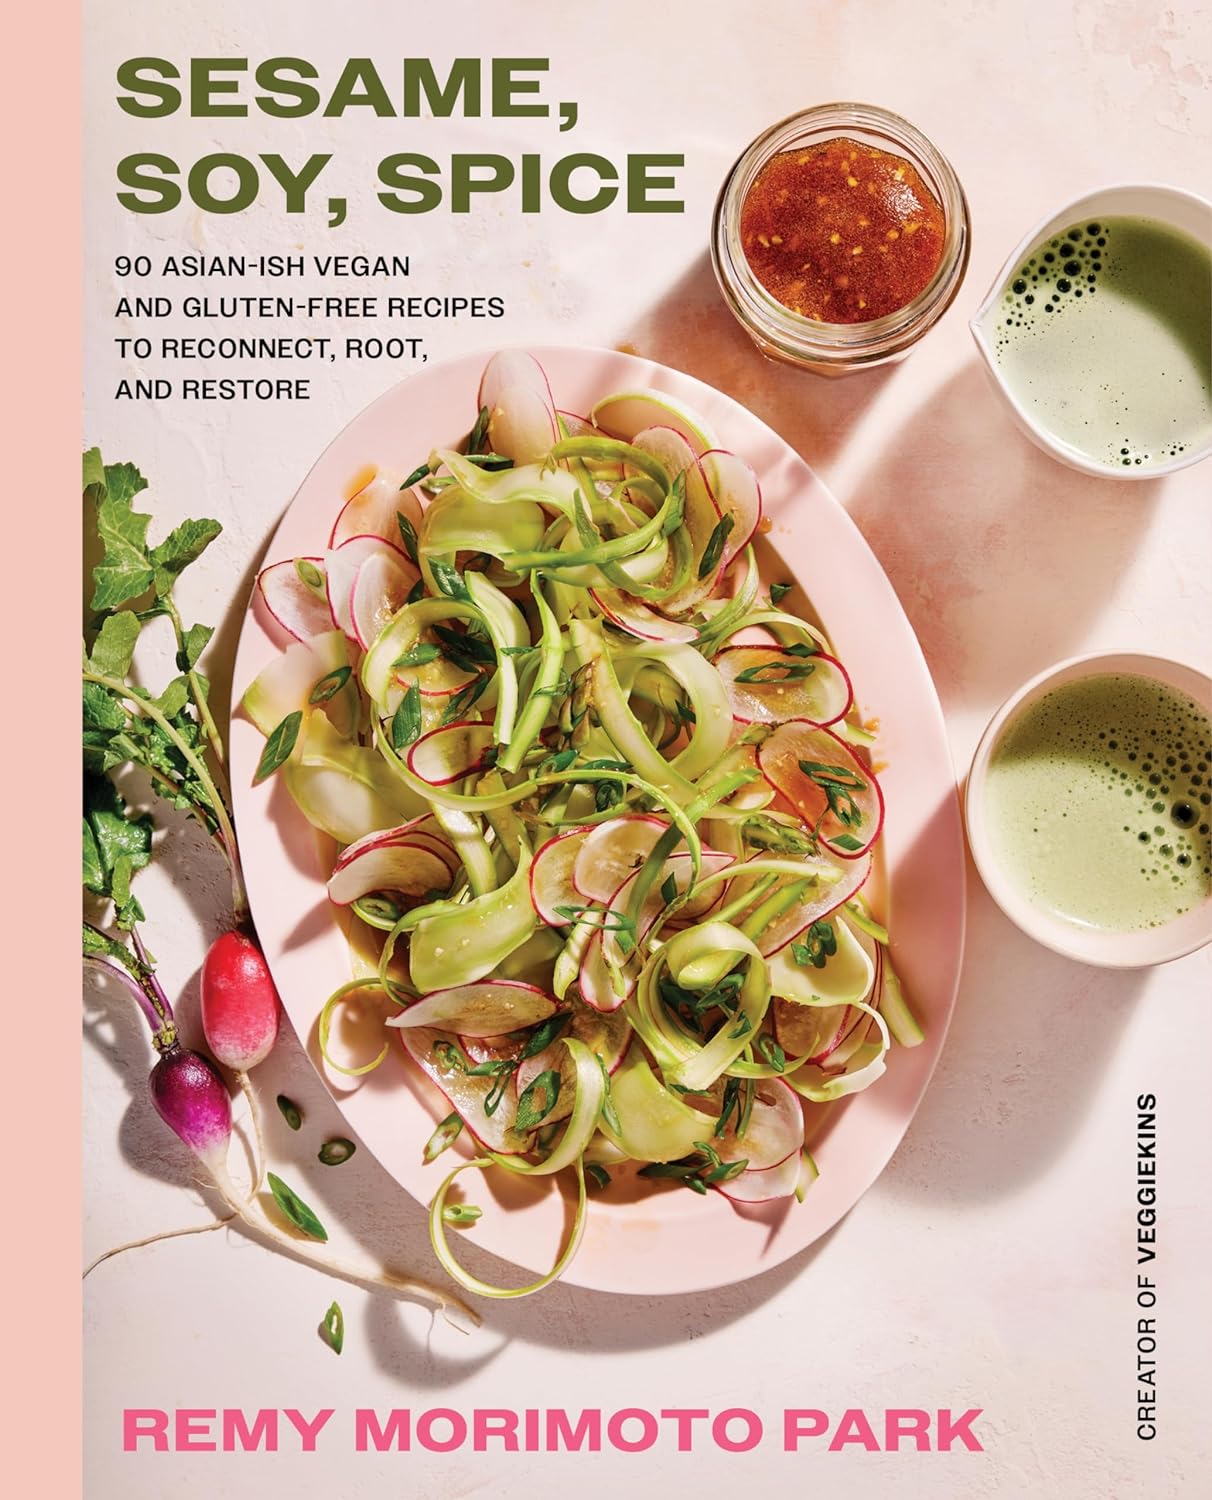 Sesame, Soy, Spice: 90 Asian-ish Vegan and Gluten-free Recipes to Reconnect, Root, and Restore (Remy Morimoto Park)